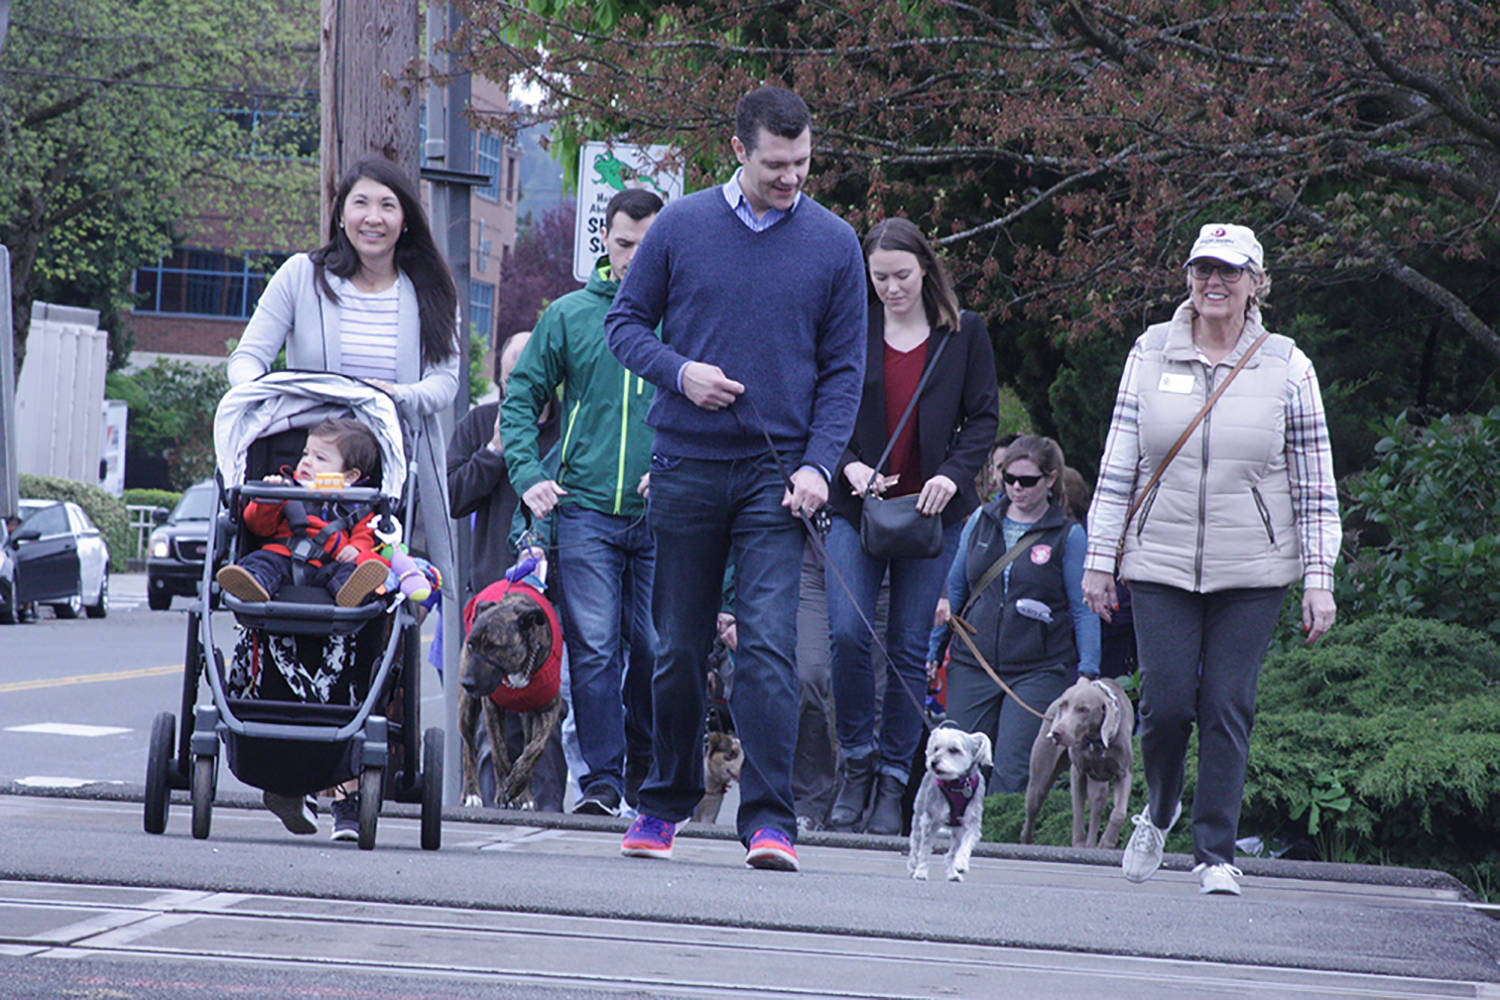 State Sen. Joe Fain and family lead the way on East Gowe Street at the Pampered Pet Walk on Saturday. MARK KLAAS, Kent Reporter